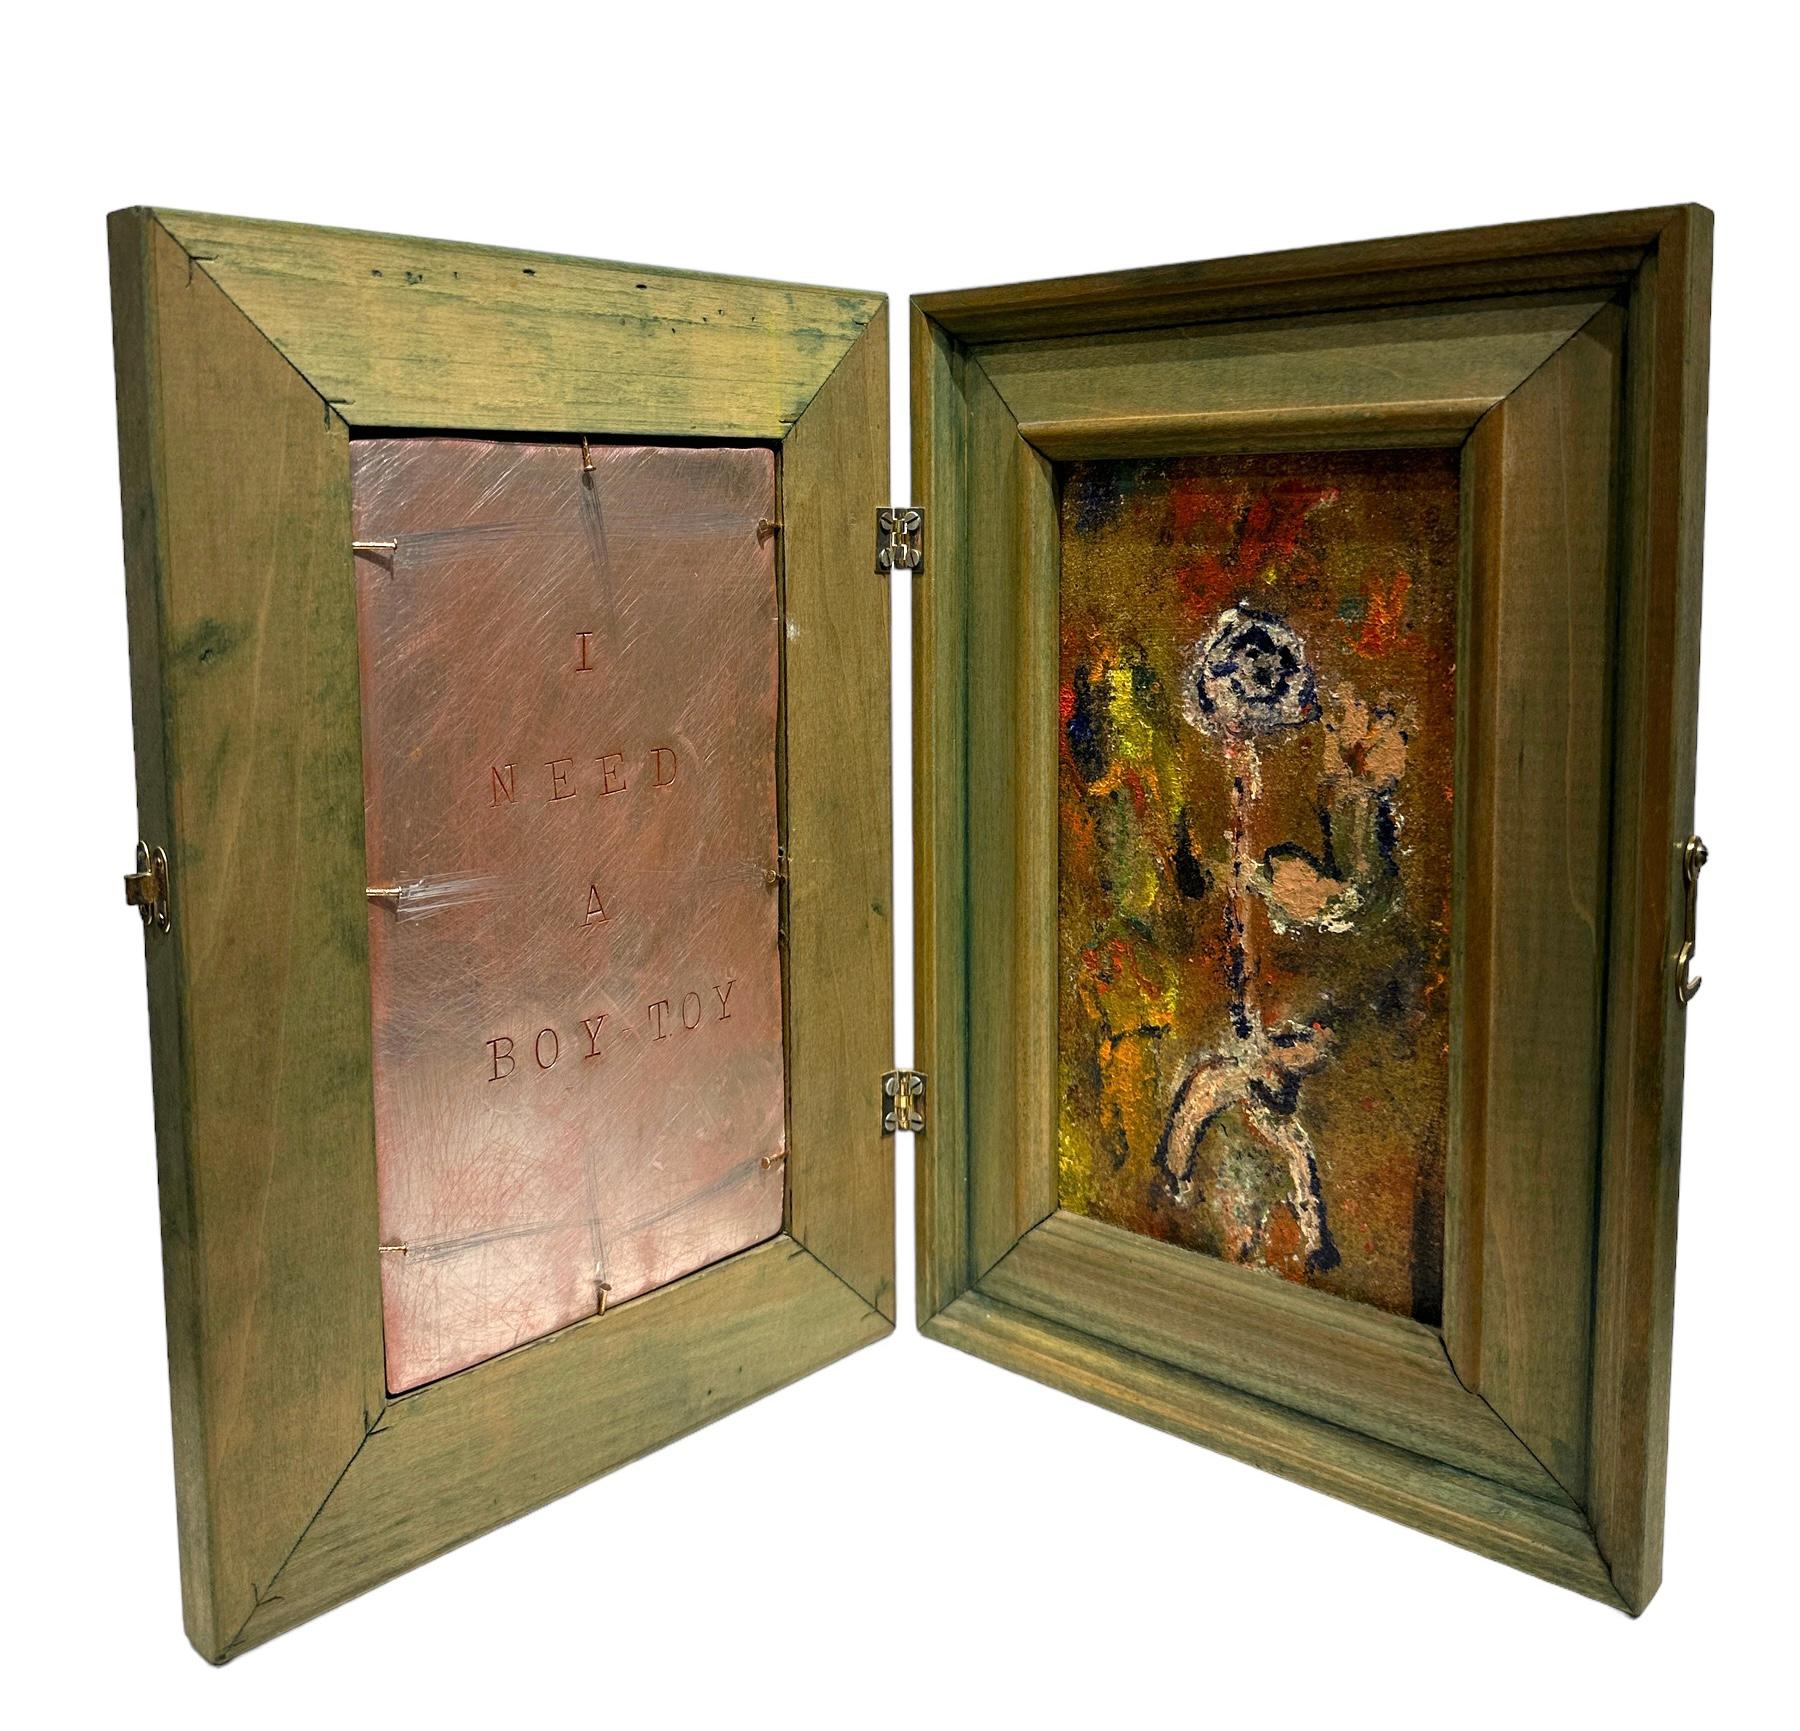 Self-taught artist John Seubert, AKA John Dolly, uses objects he uncovers as he rehabs older homes in Chicago. This piece has two frames that are hinged together.  A mirror adorns the outside.  When opened, the right panel has a primitive figure